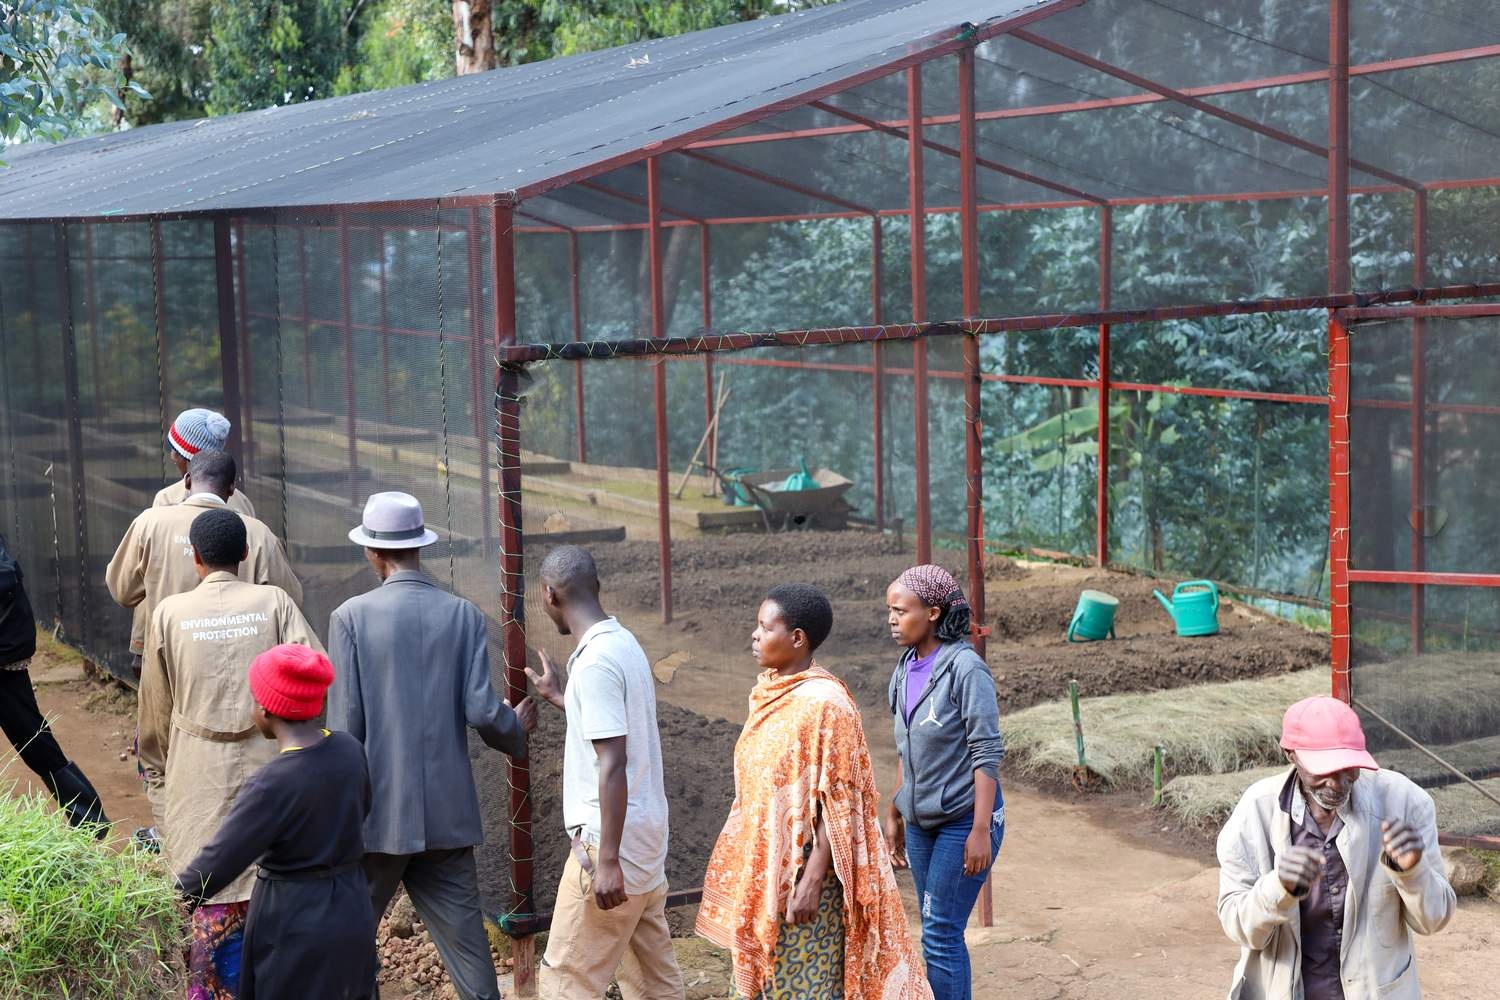 Men and women outside a shaded mesh greenhouse.